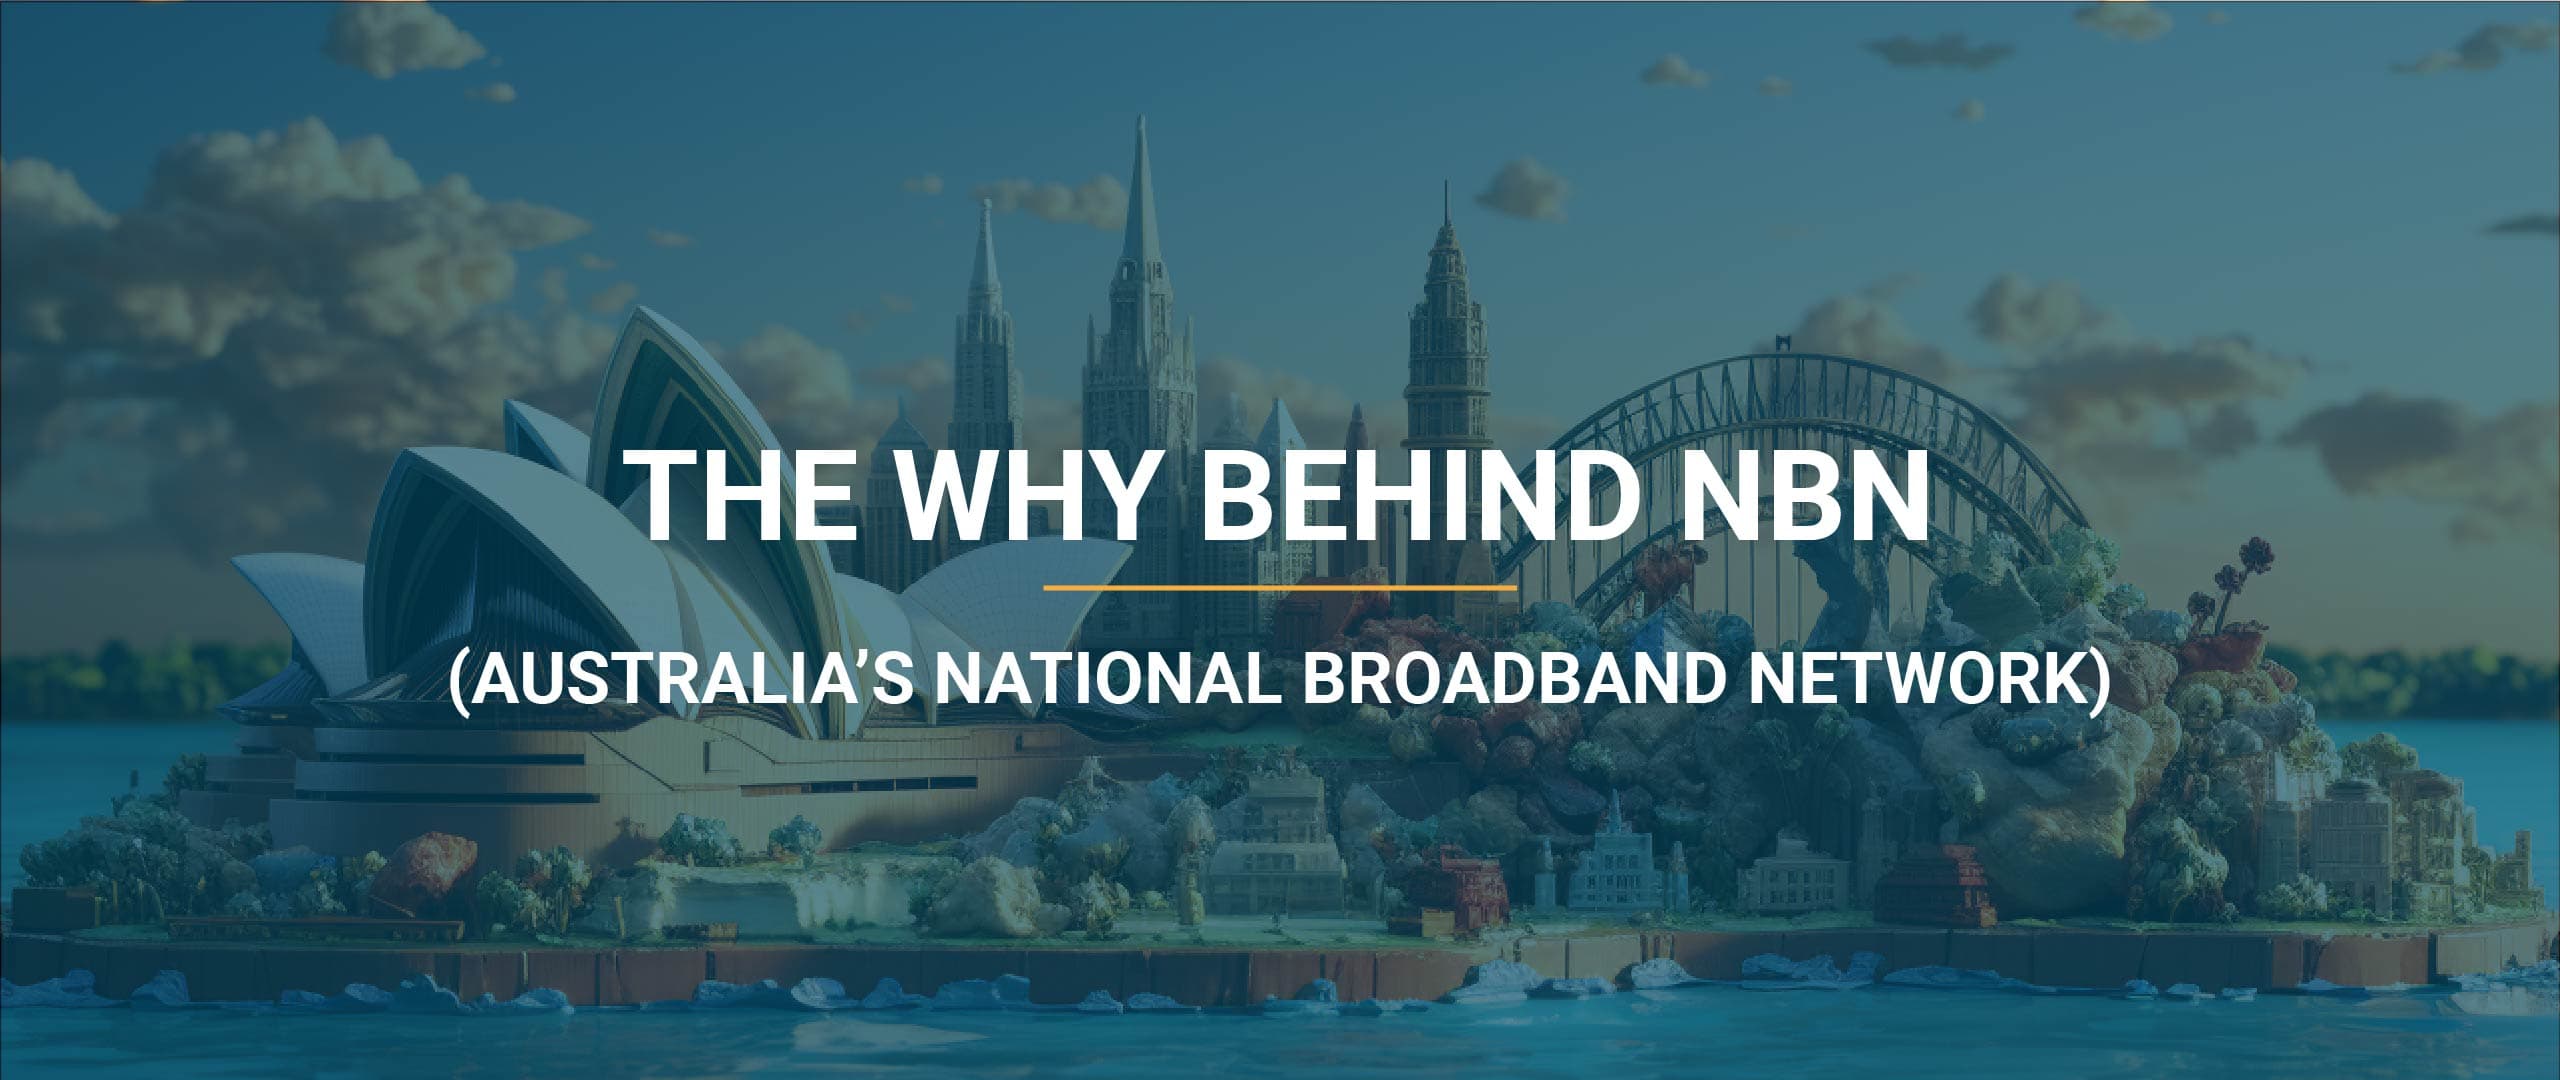 The why behind NBN - why nbn was created